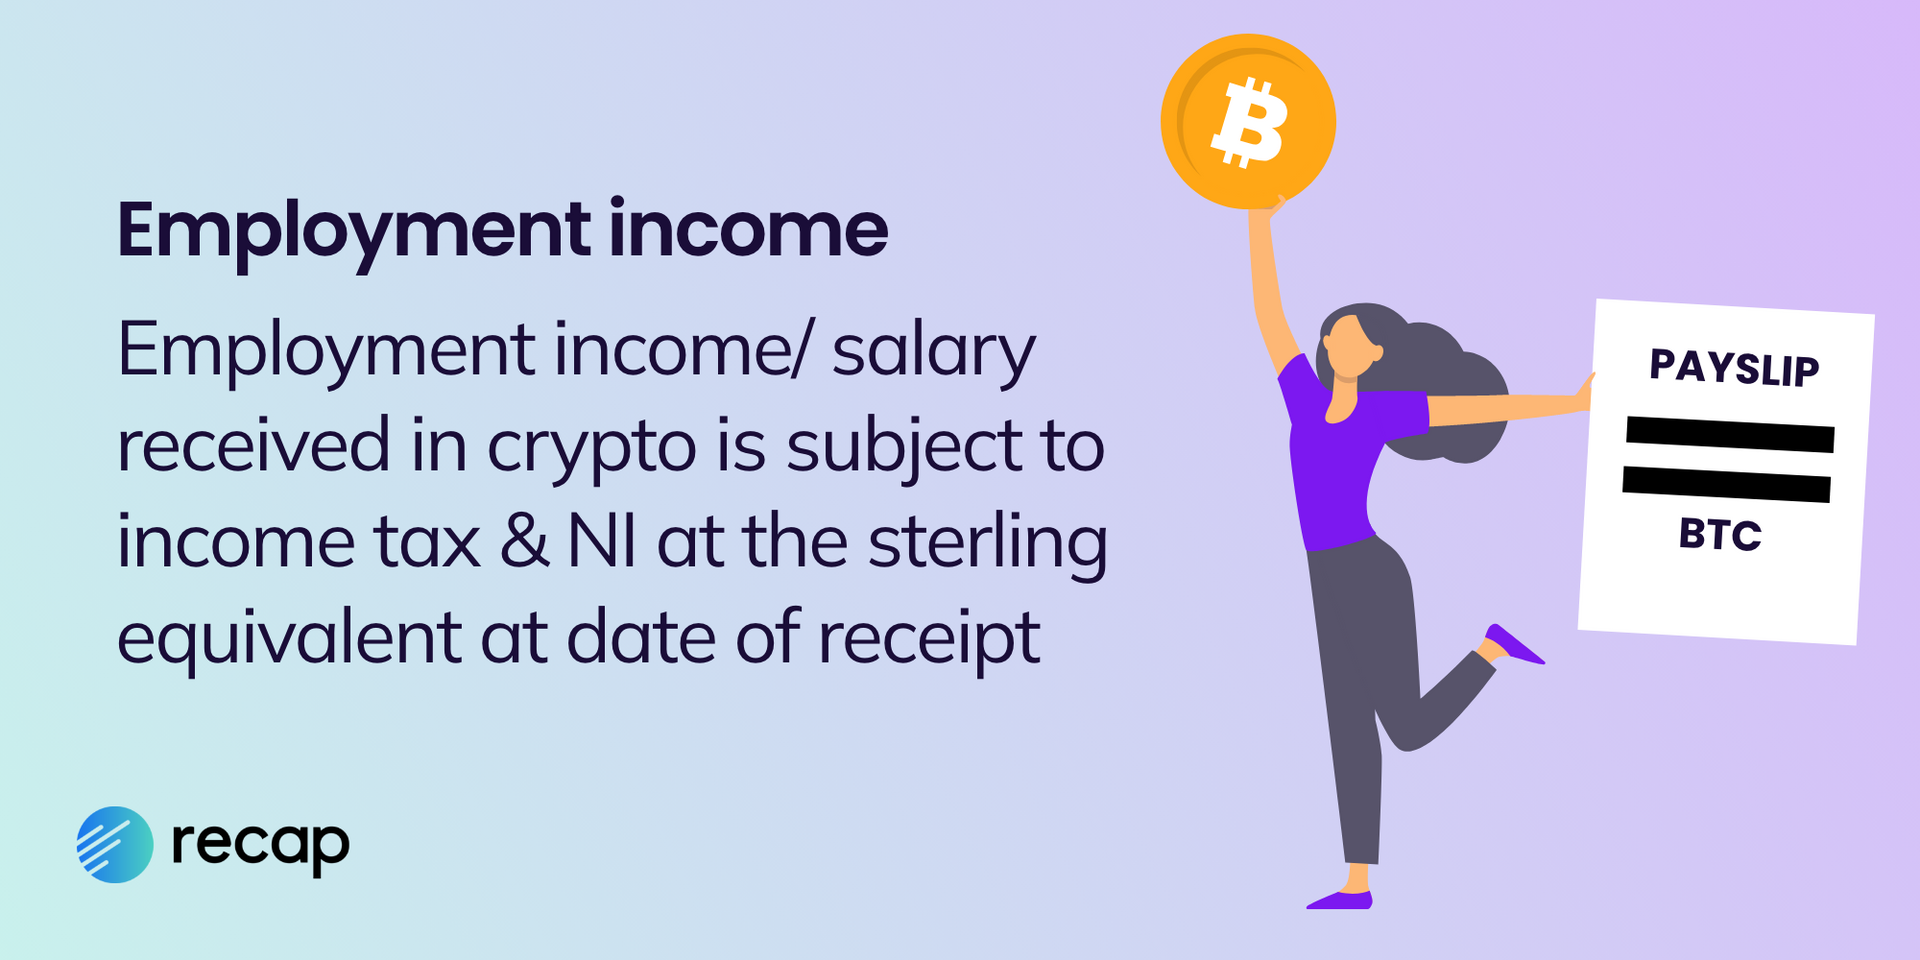 An infographic stating that employment income/salary received in crypto is subject to income tax and national insurance at the sterling equivalent at date of receipt